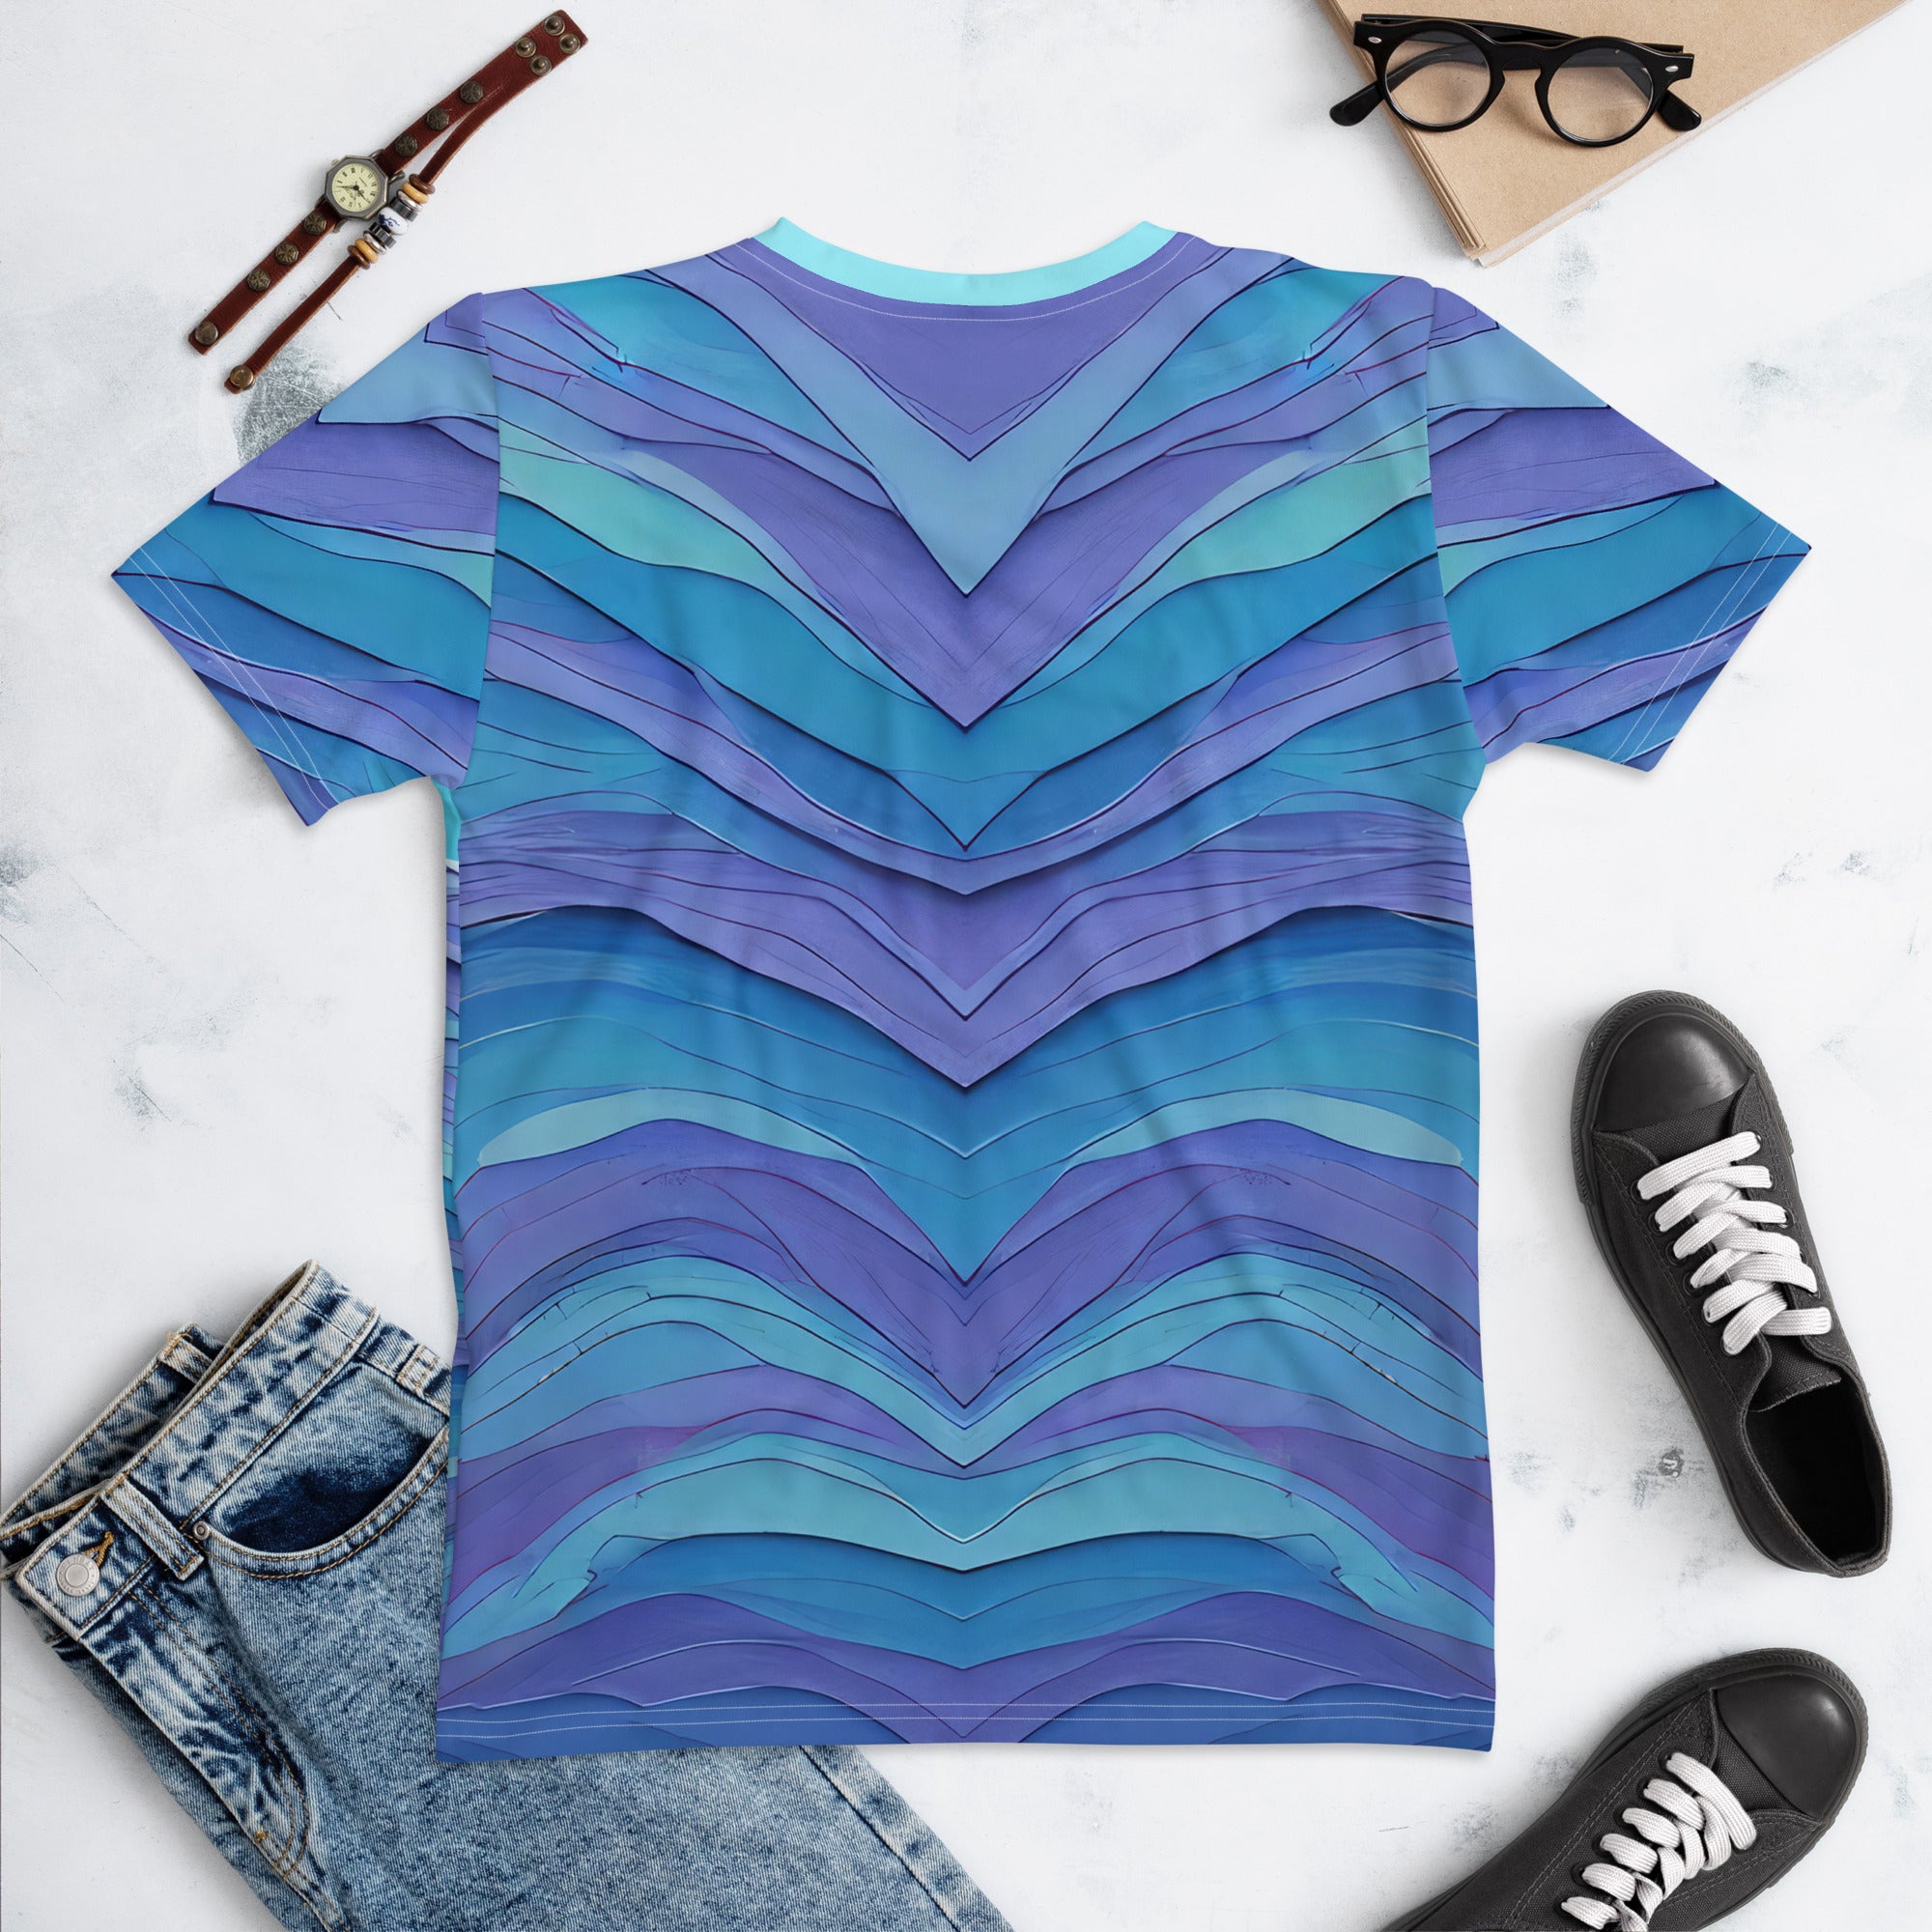 Elegant Garden Labyrinth Exploration women's T-shirt in a casual setting.